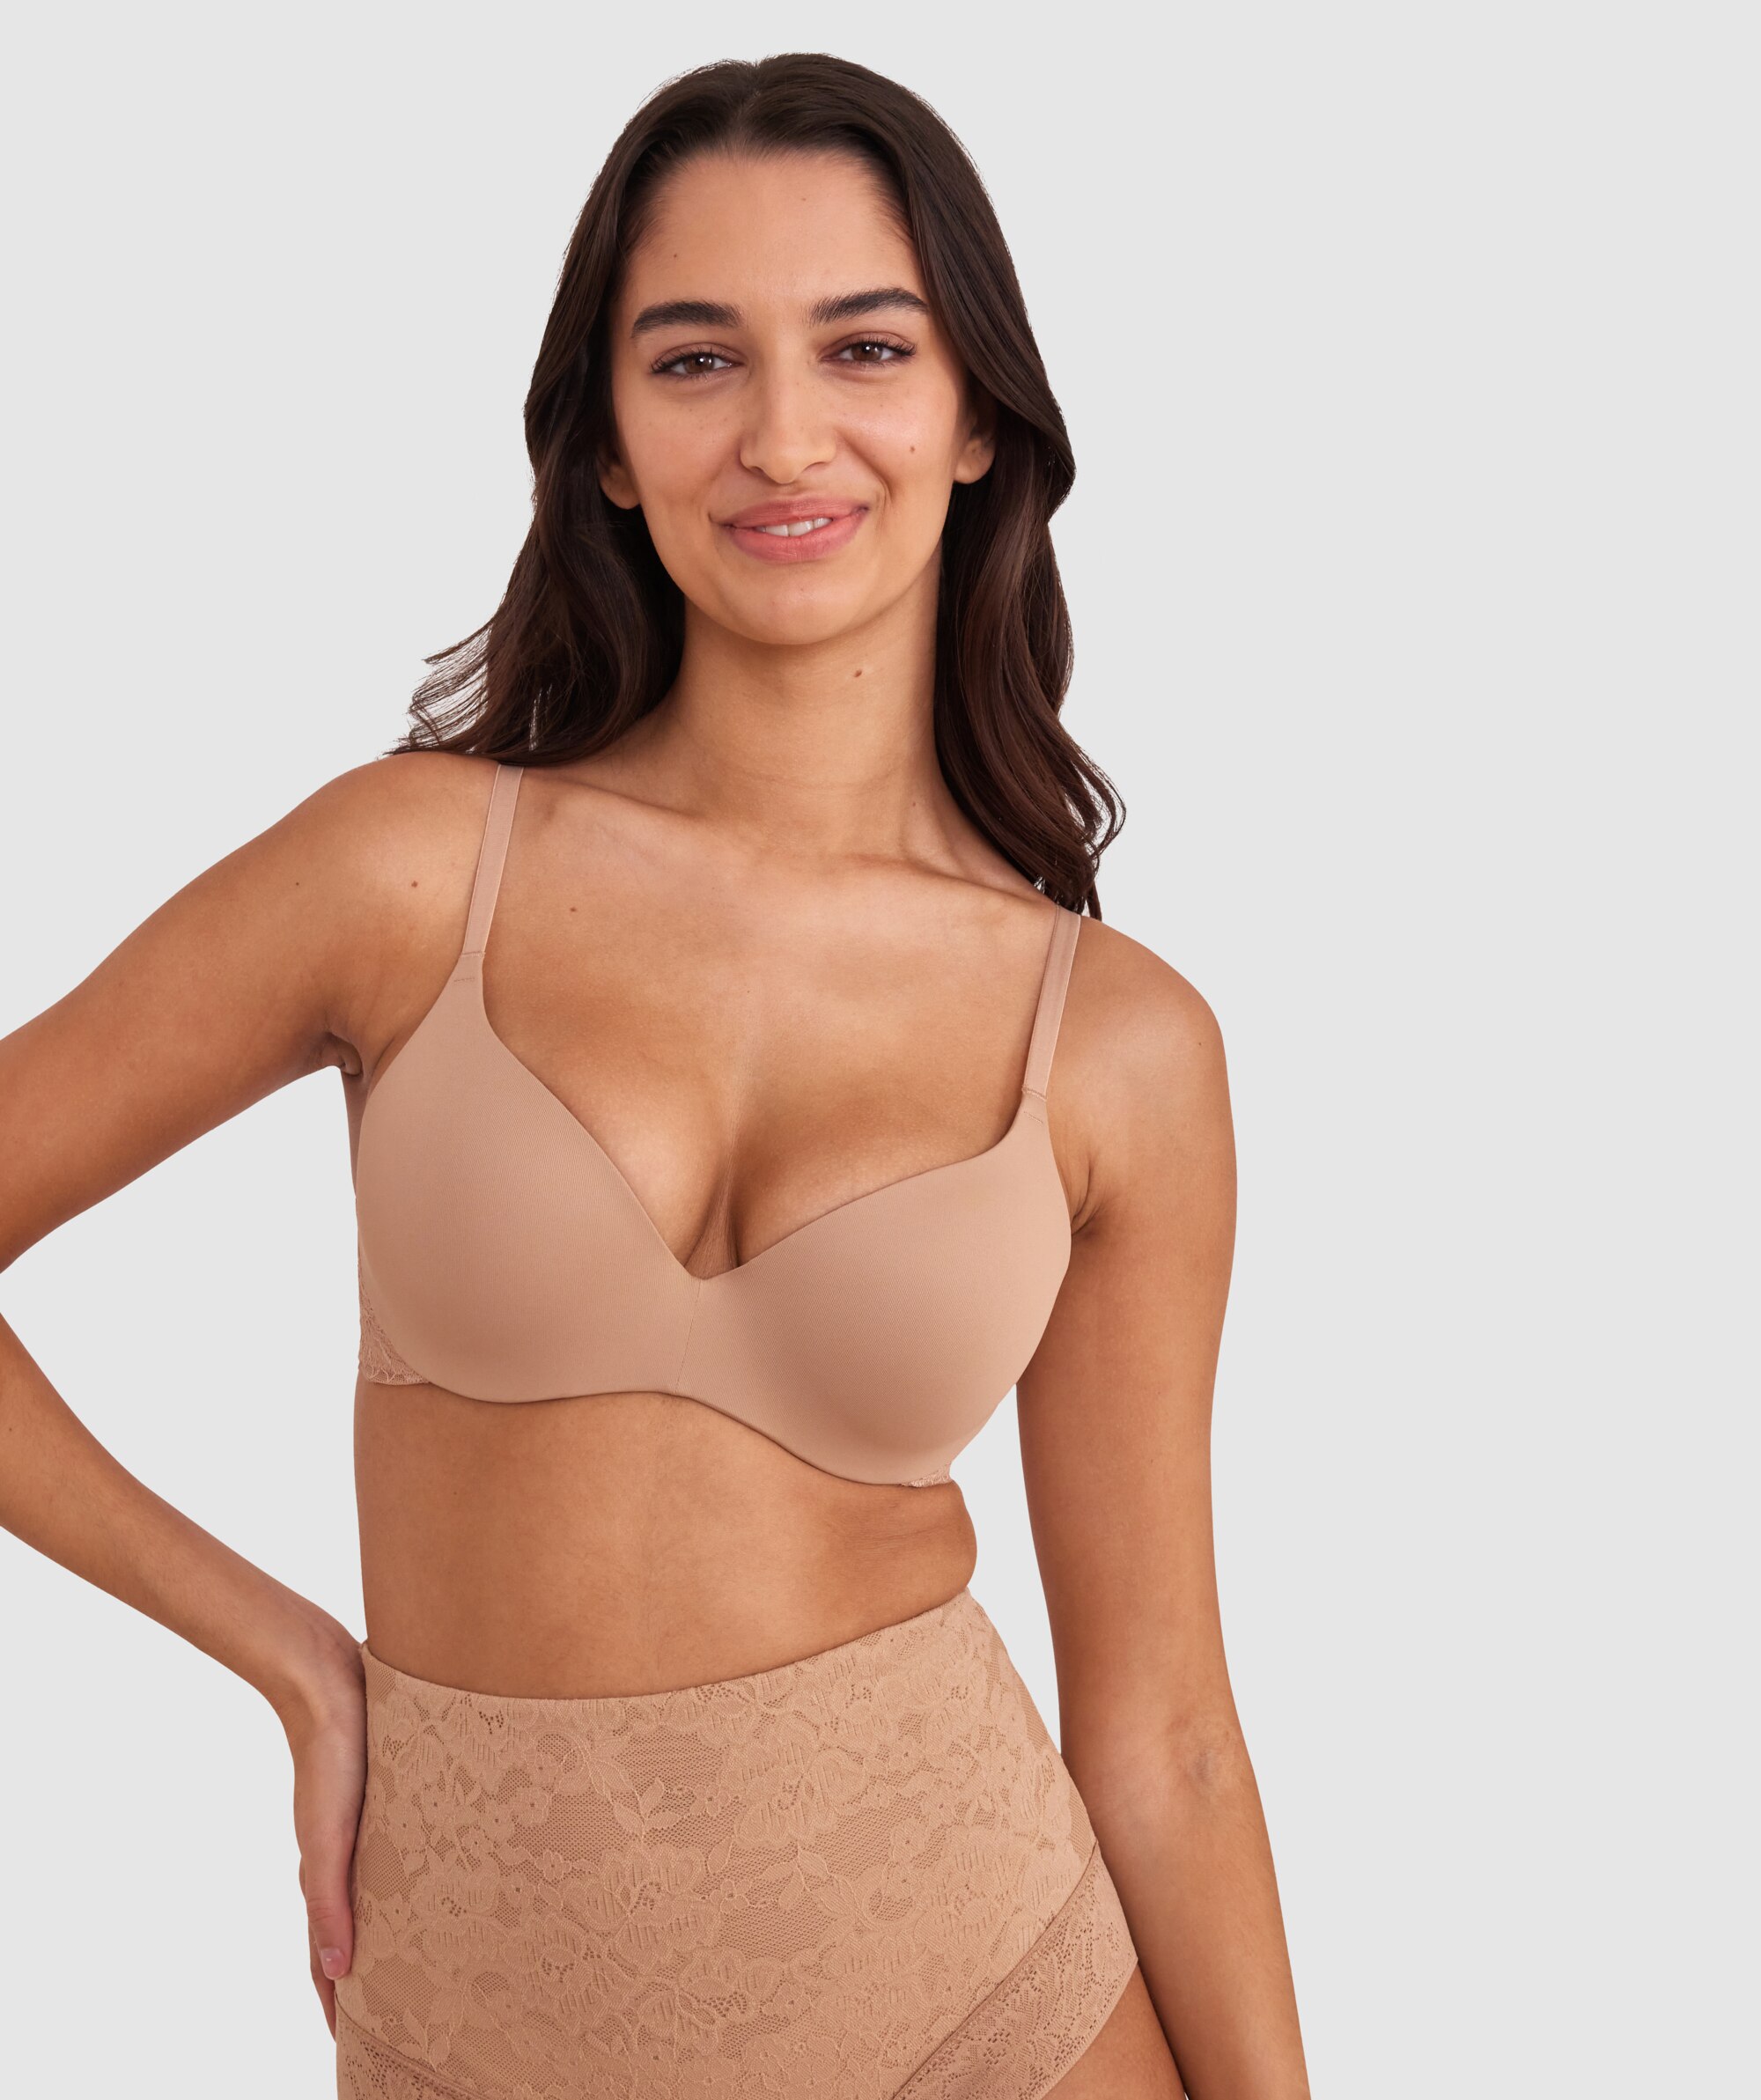 Bras N Things Luxe Solutions Thigh Shaper - Nude 3